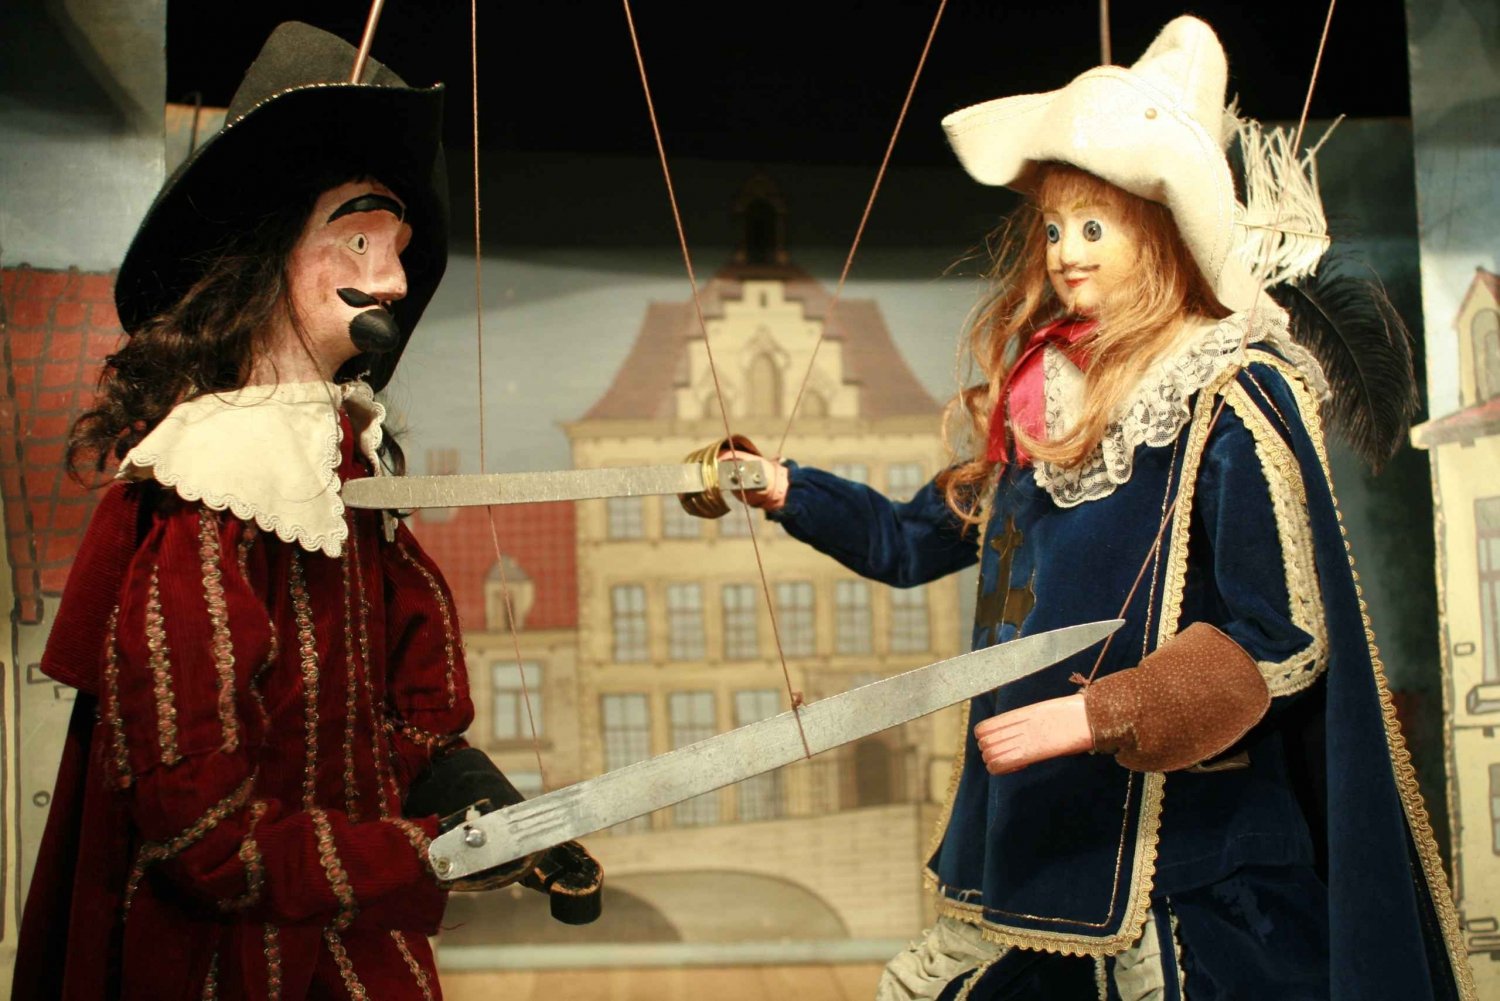 Brussels: The Three Musketeers Private Puppet Show